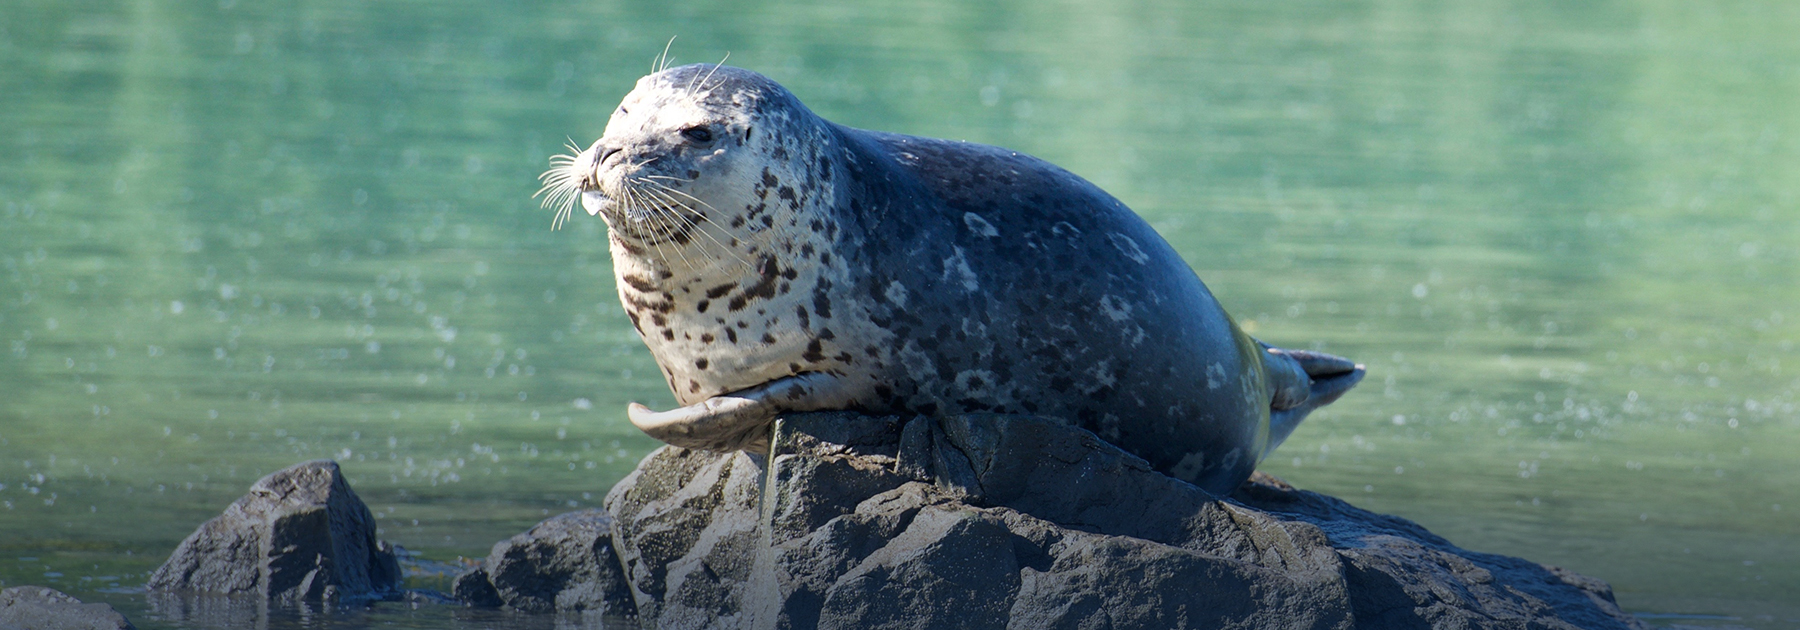 Harbor seal hauled out on rock.